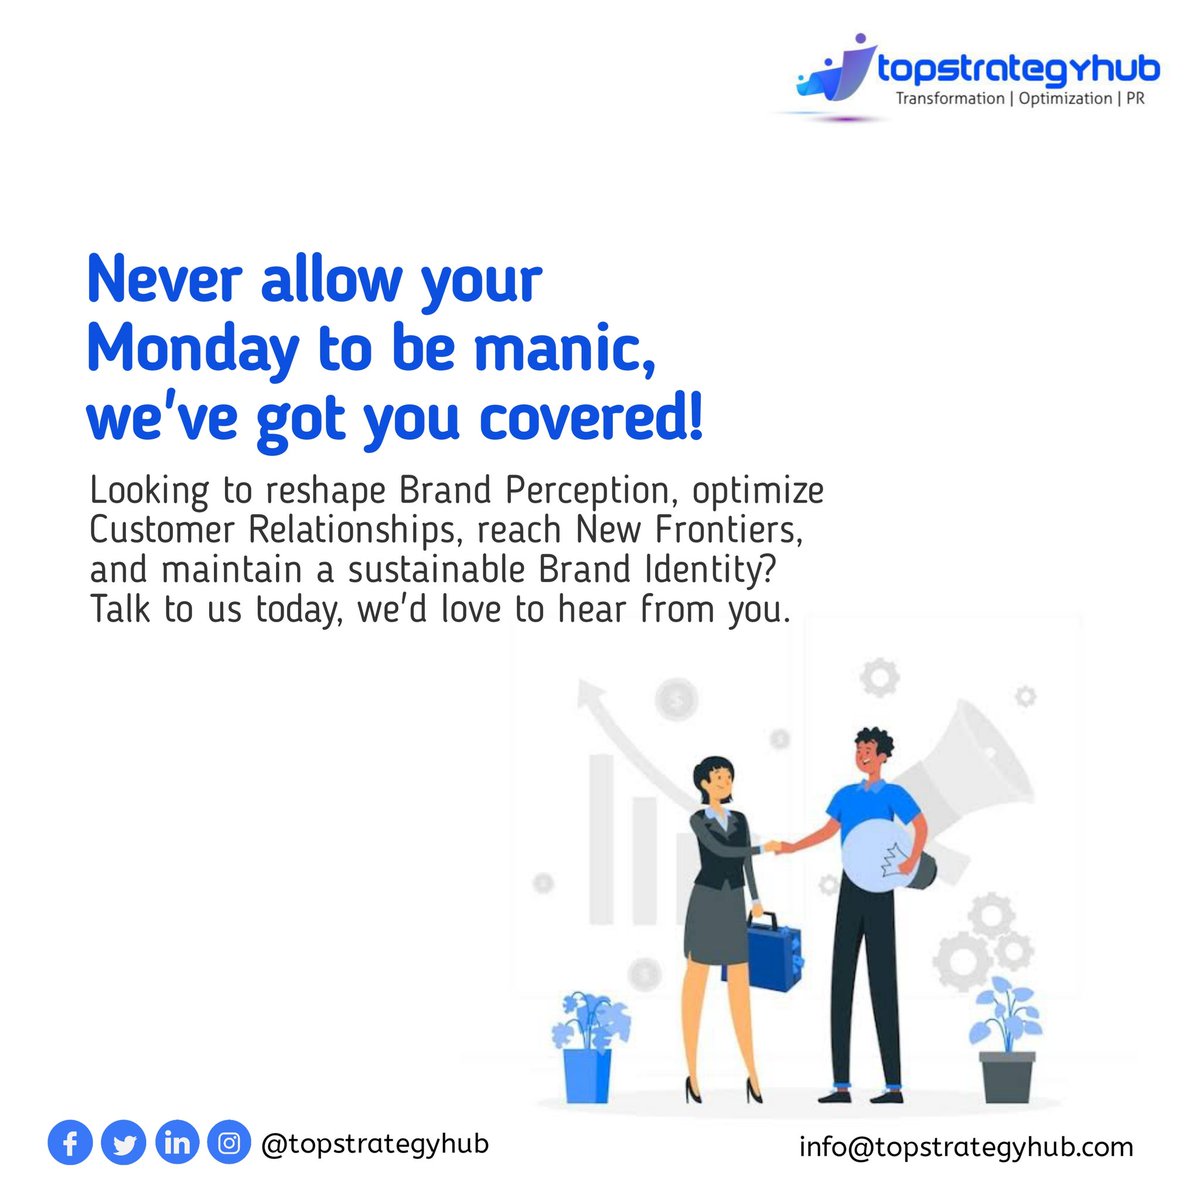 We'd love to hear from you, talk to us via your preferred contact option today.

#Topstrategyhub
#Transformation
#Optimization
#PublicRelations